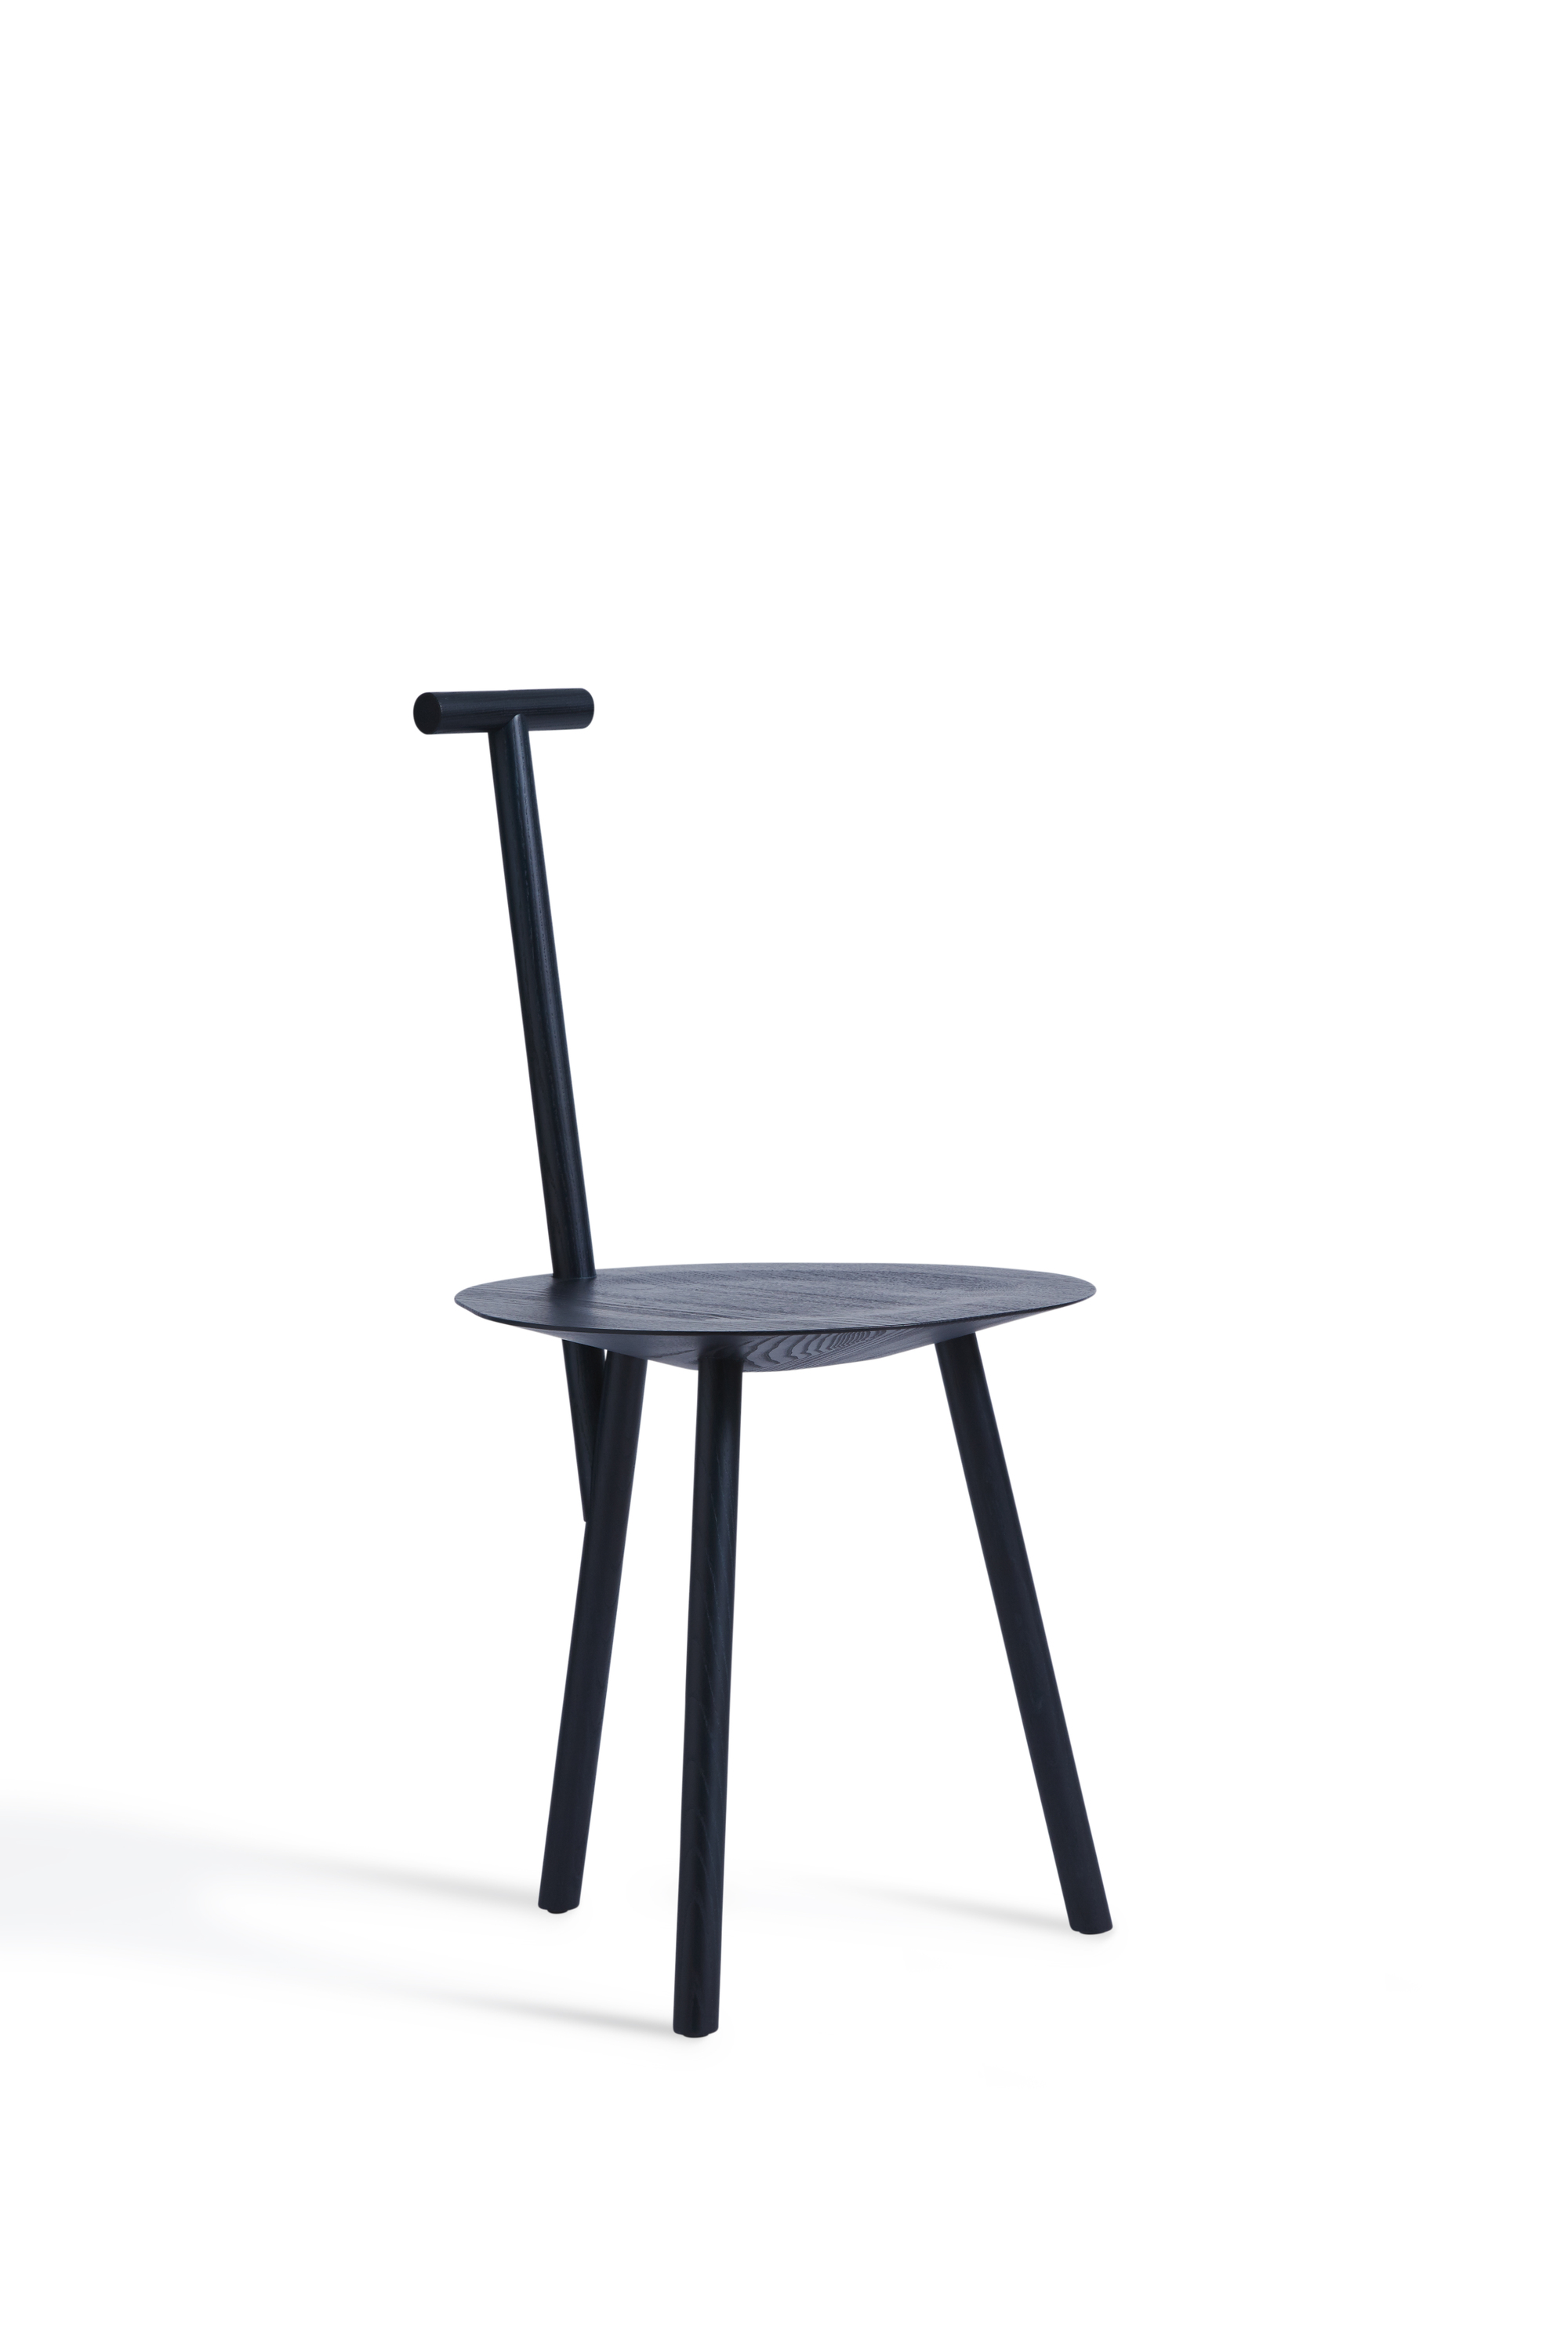 Spade Chair by Faye Toogood for Please Wait to be Seated